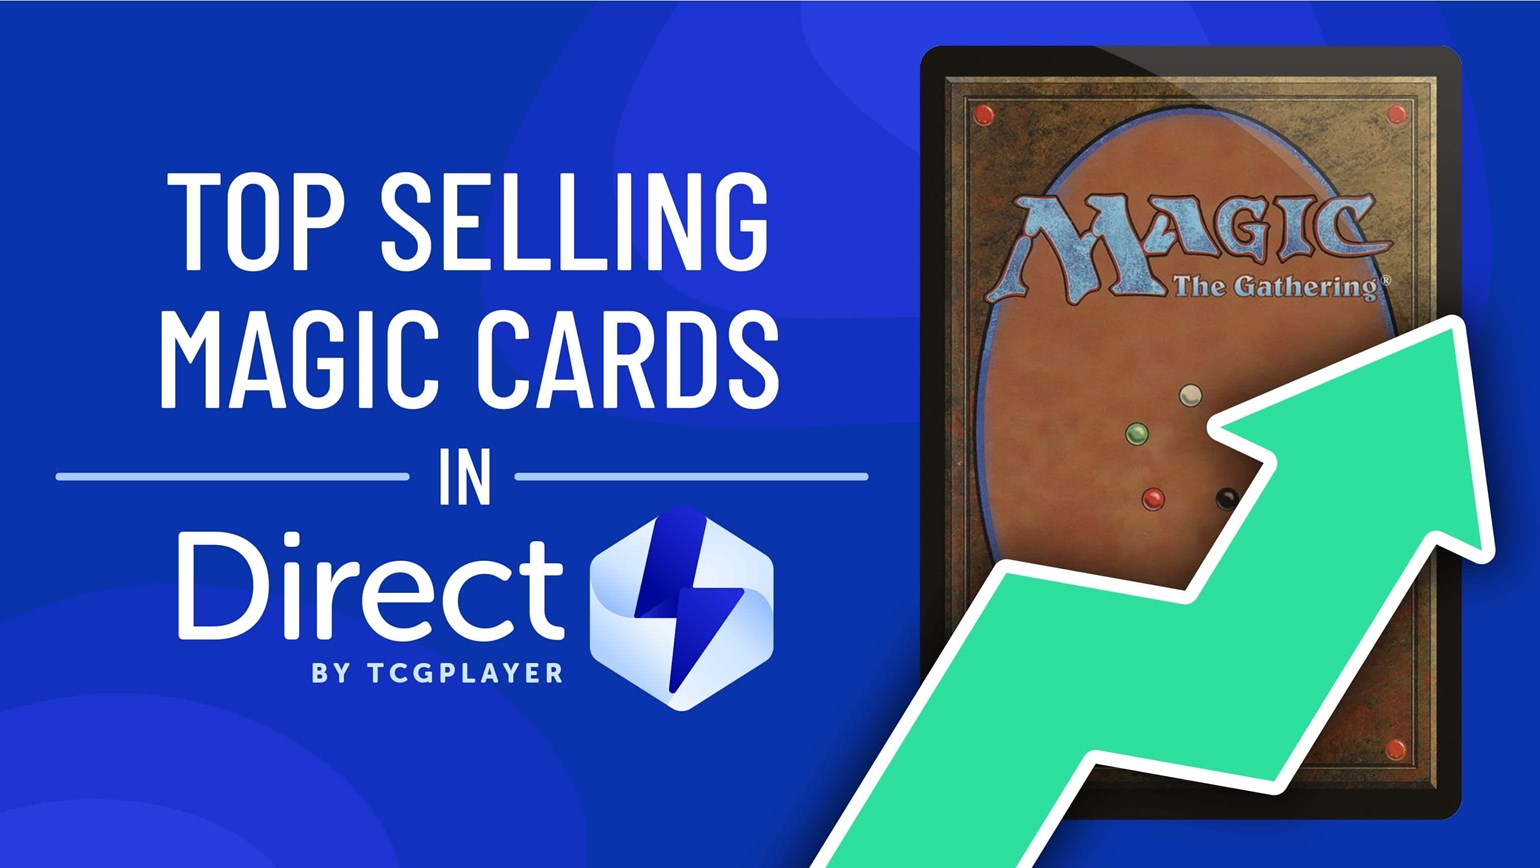 October Top Selling Magic: The Gathering Cards in Direct by TCGplayer